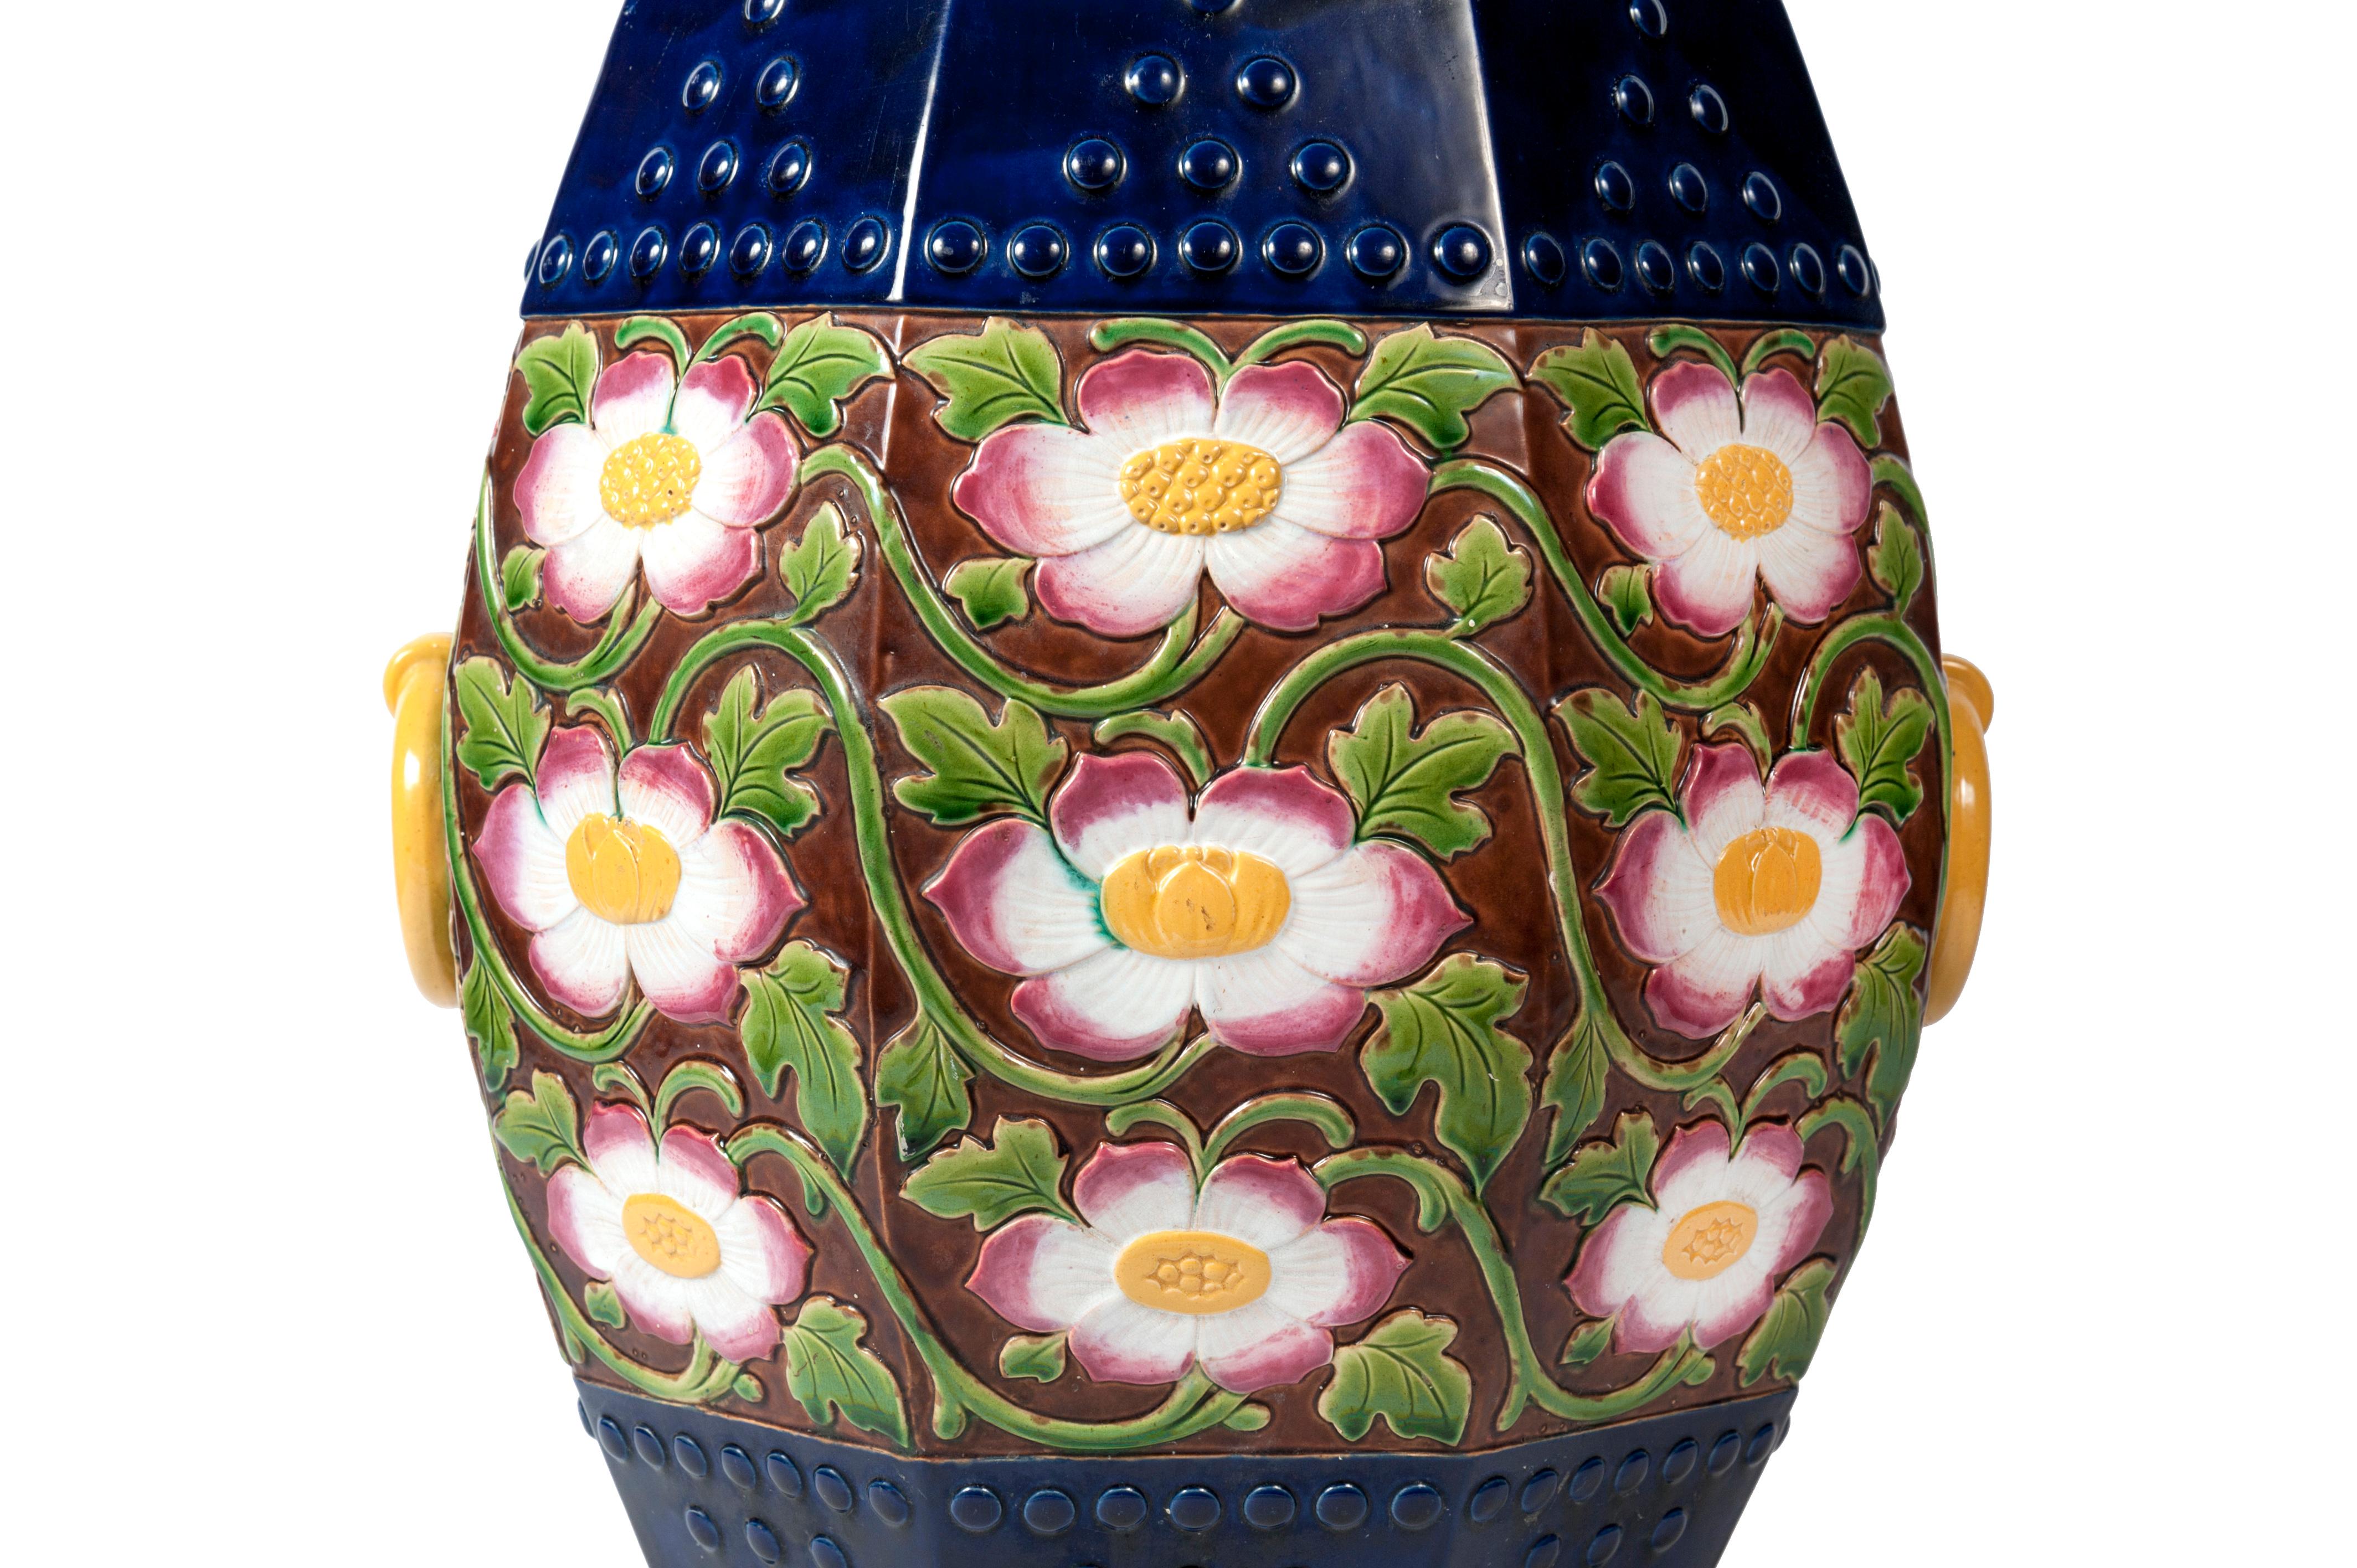 This superb garden seat or garden stool is the work of the British manufacturer Minton. Its inventive facetted drum shape is decorated with flowers on a brown background. The large, burst flowers with golden buds reveal white petals with pinkish